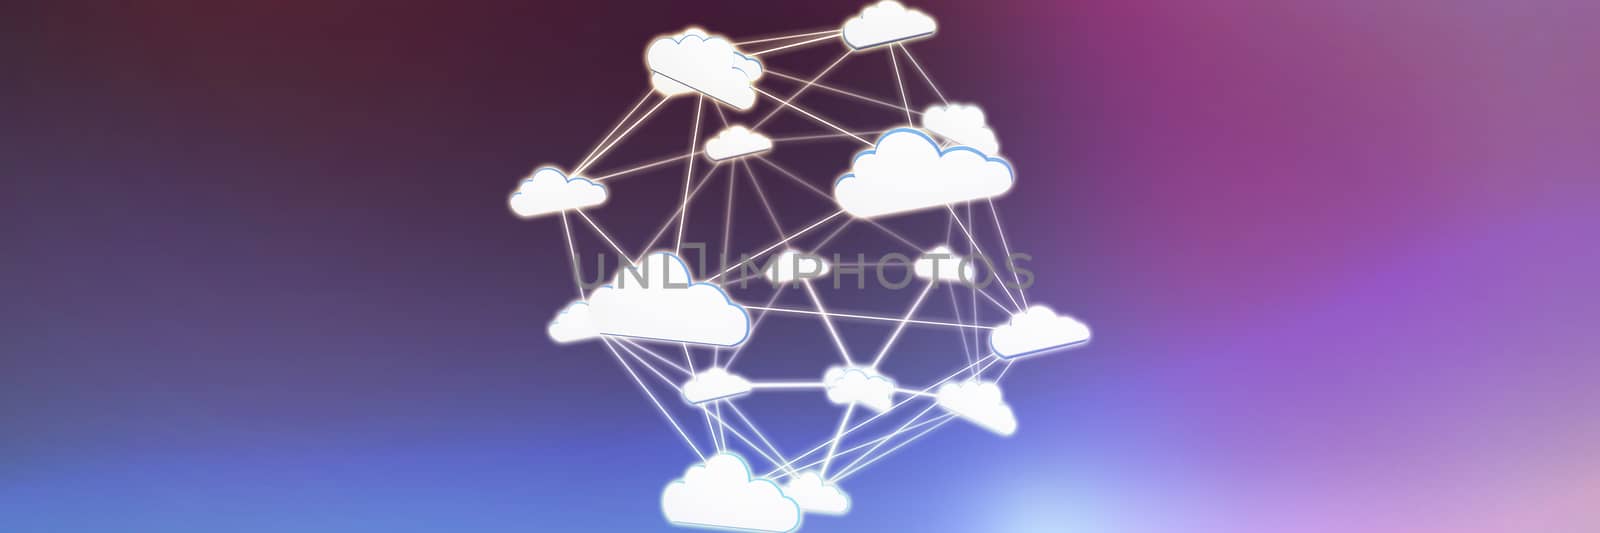 Abstract image of cloud computing symbol against gray and purple background